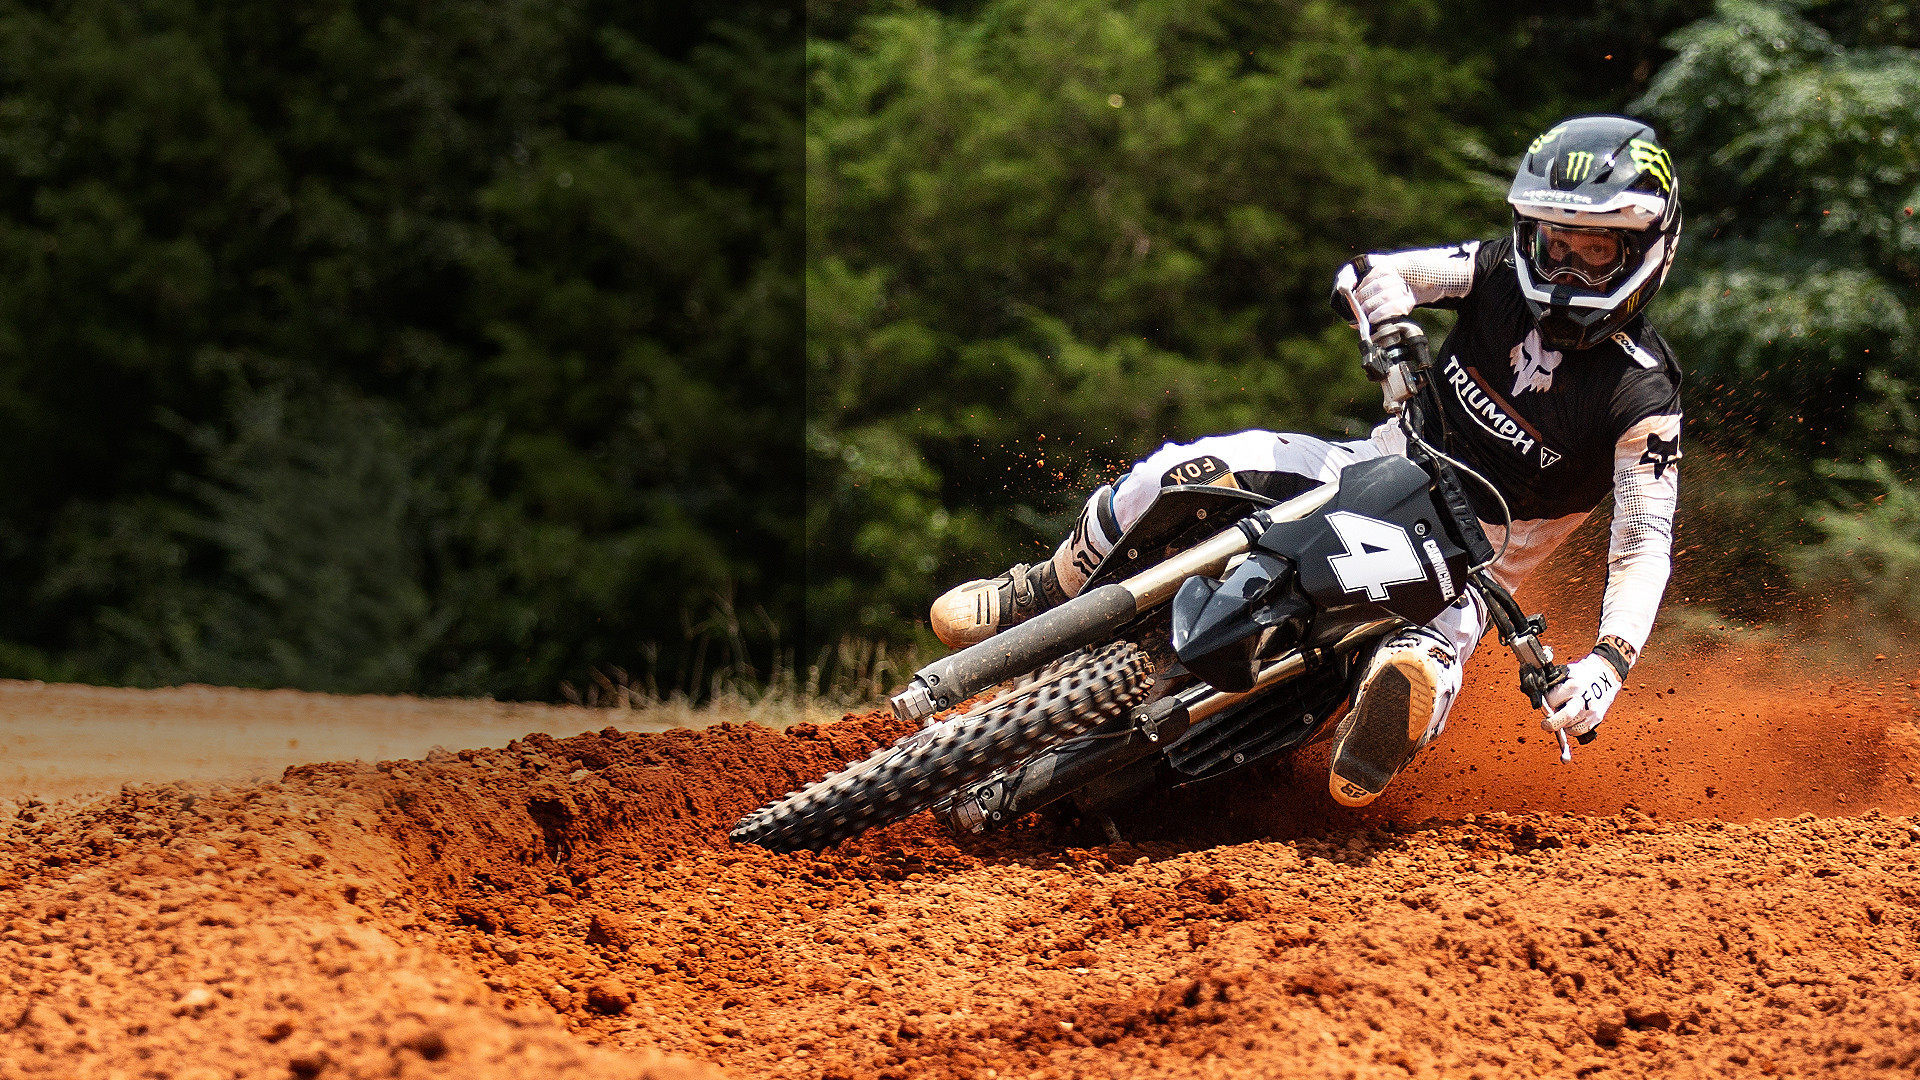 Triumph test rider and ambassador Ricky Carmichael (4) in action on the company's new 250cc motocross bike. Photo courtesy Triumph.